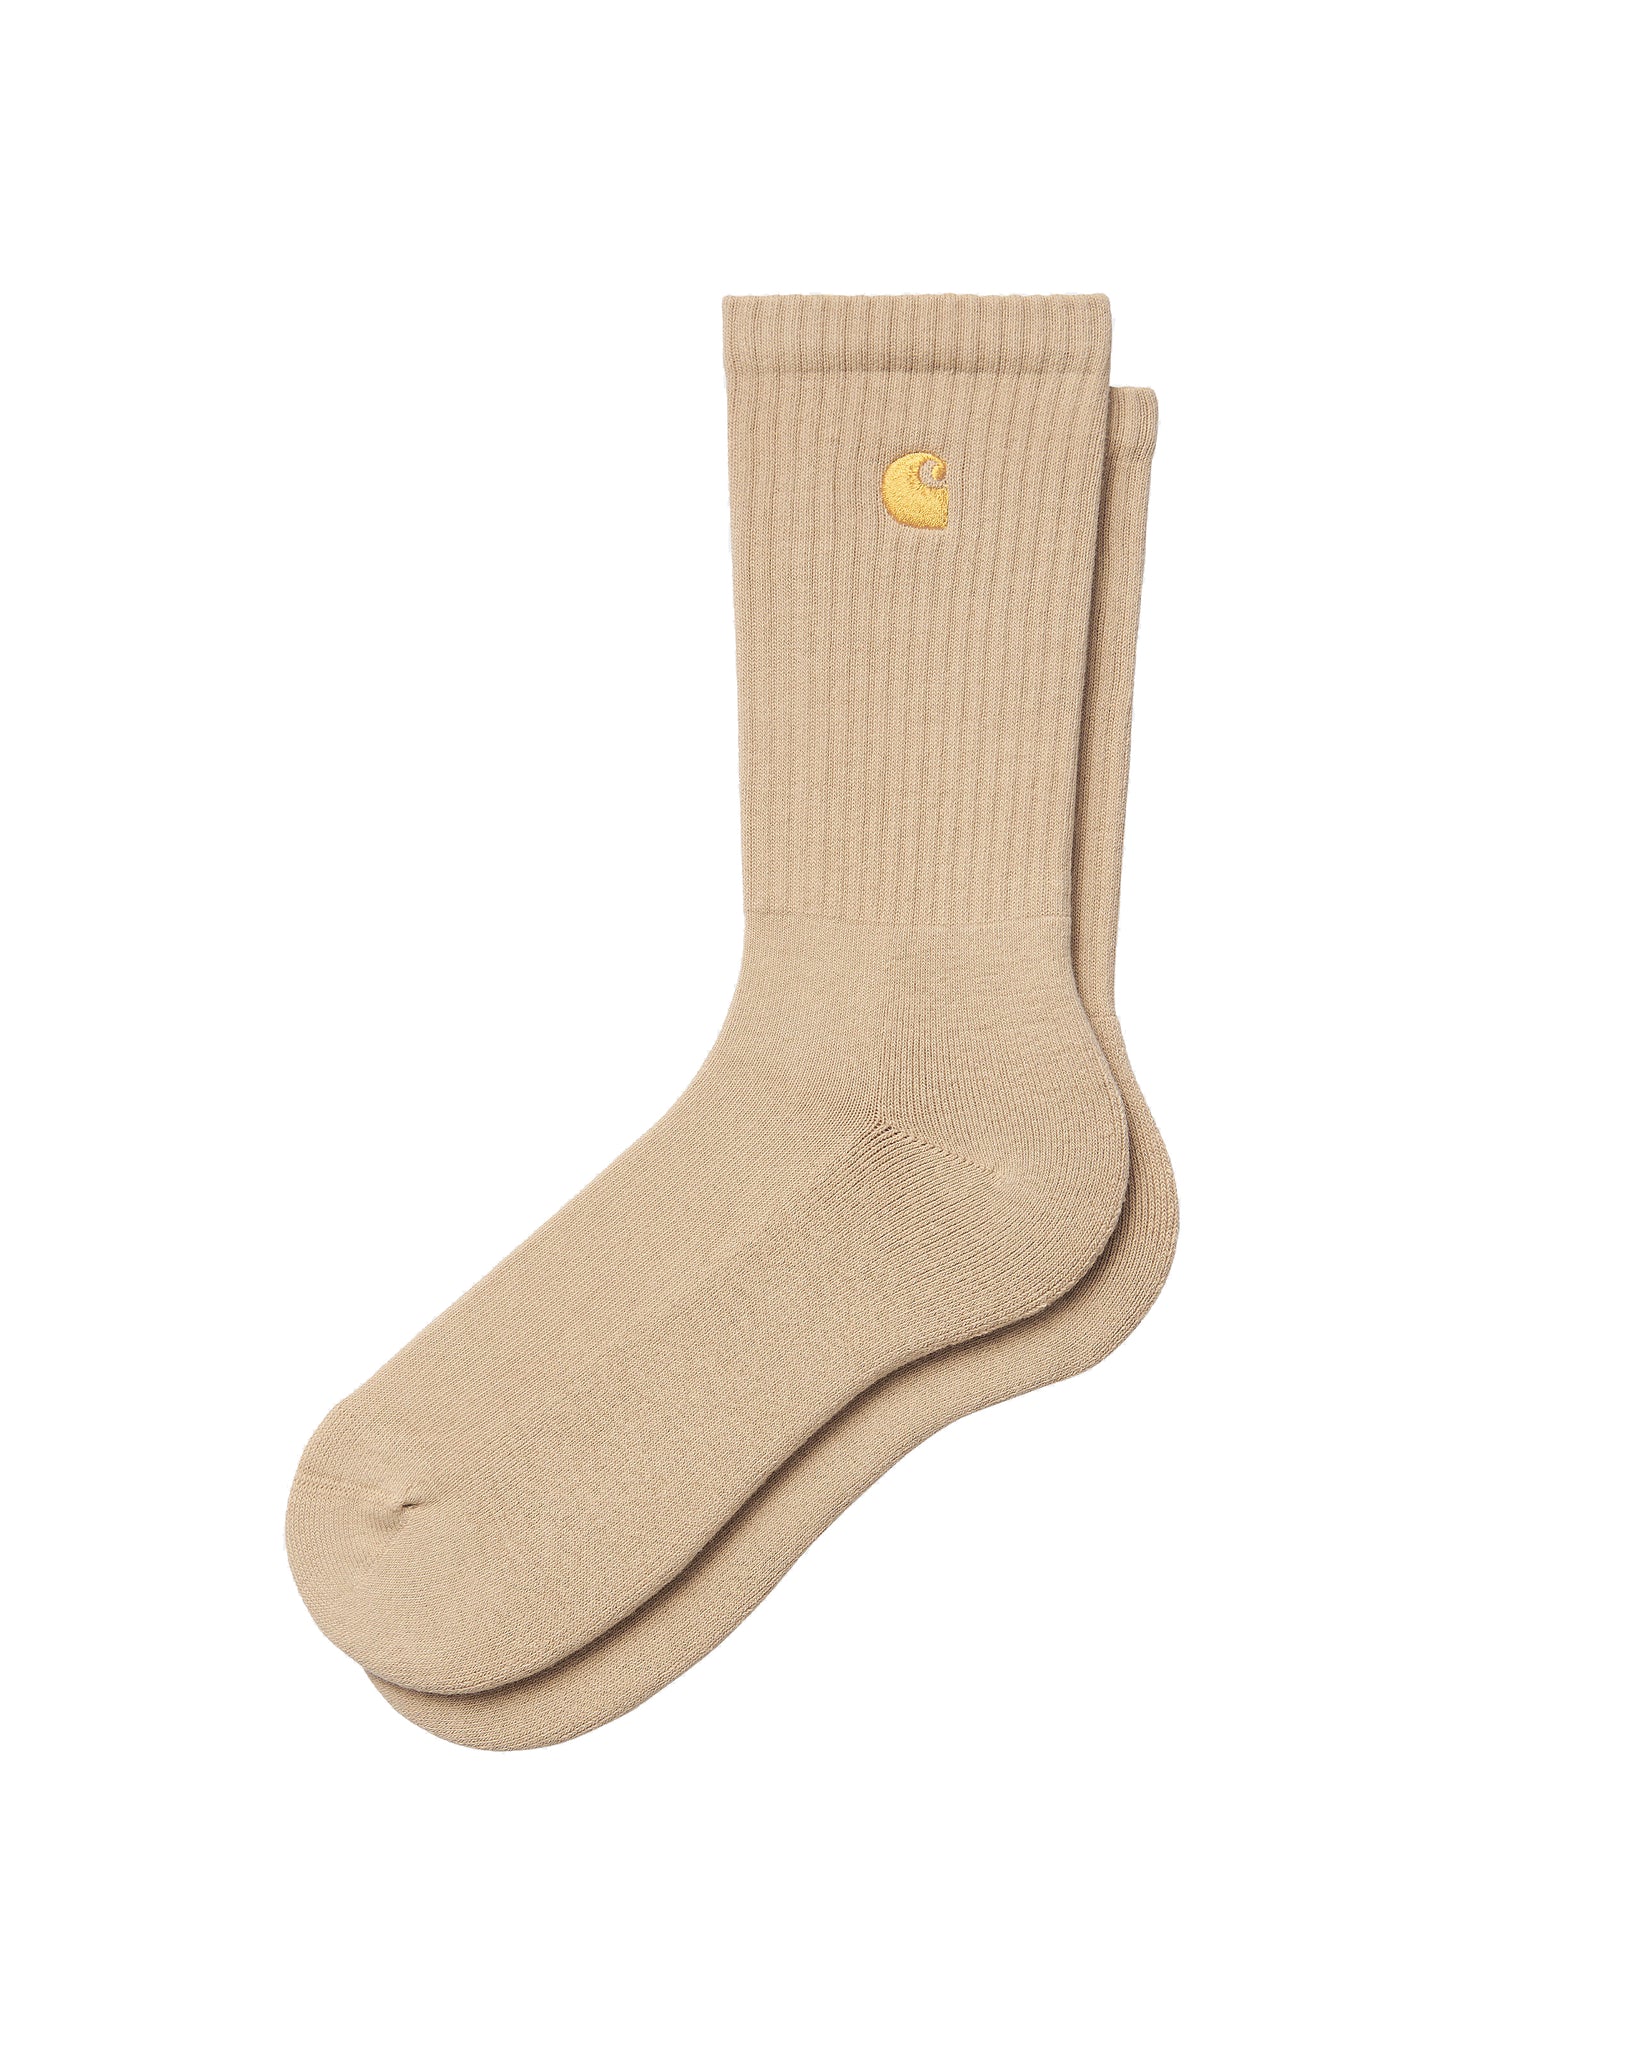 Chaussettes Chase - Sable/Or